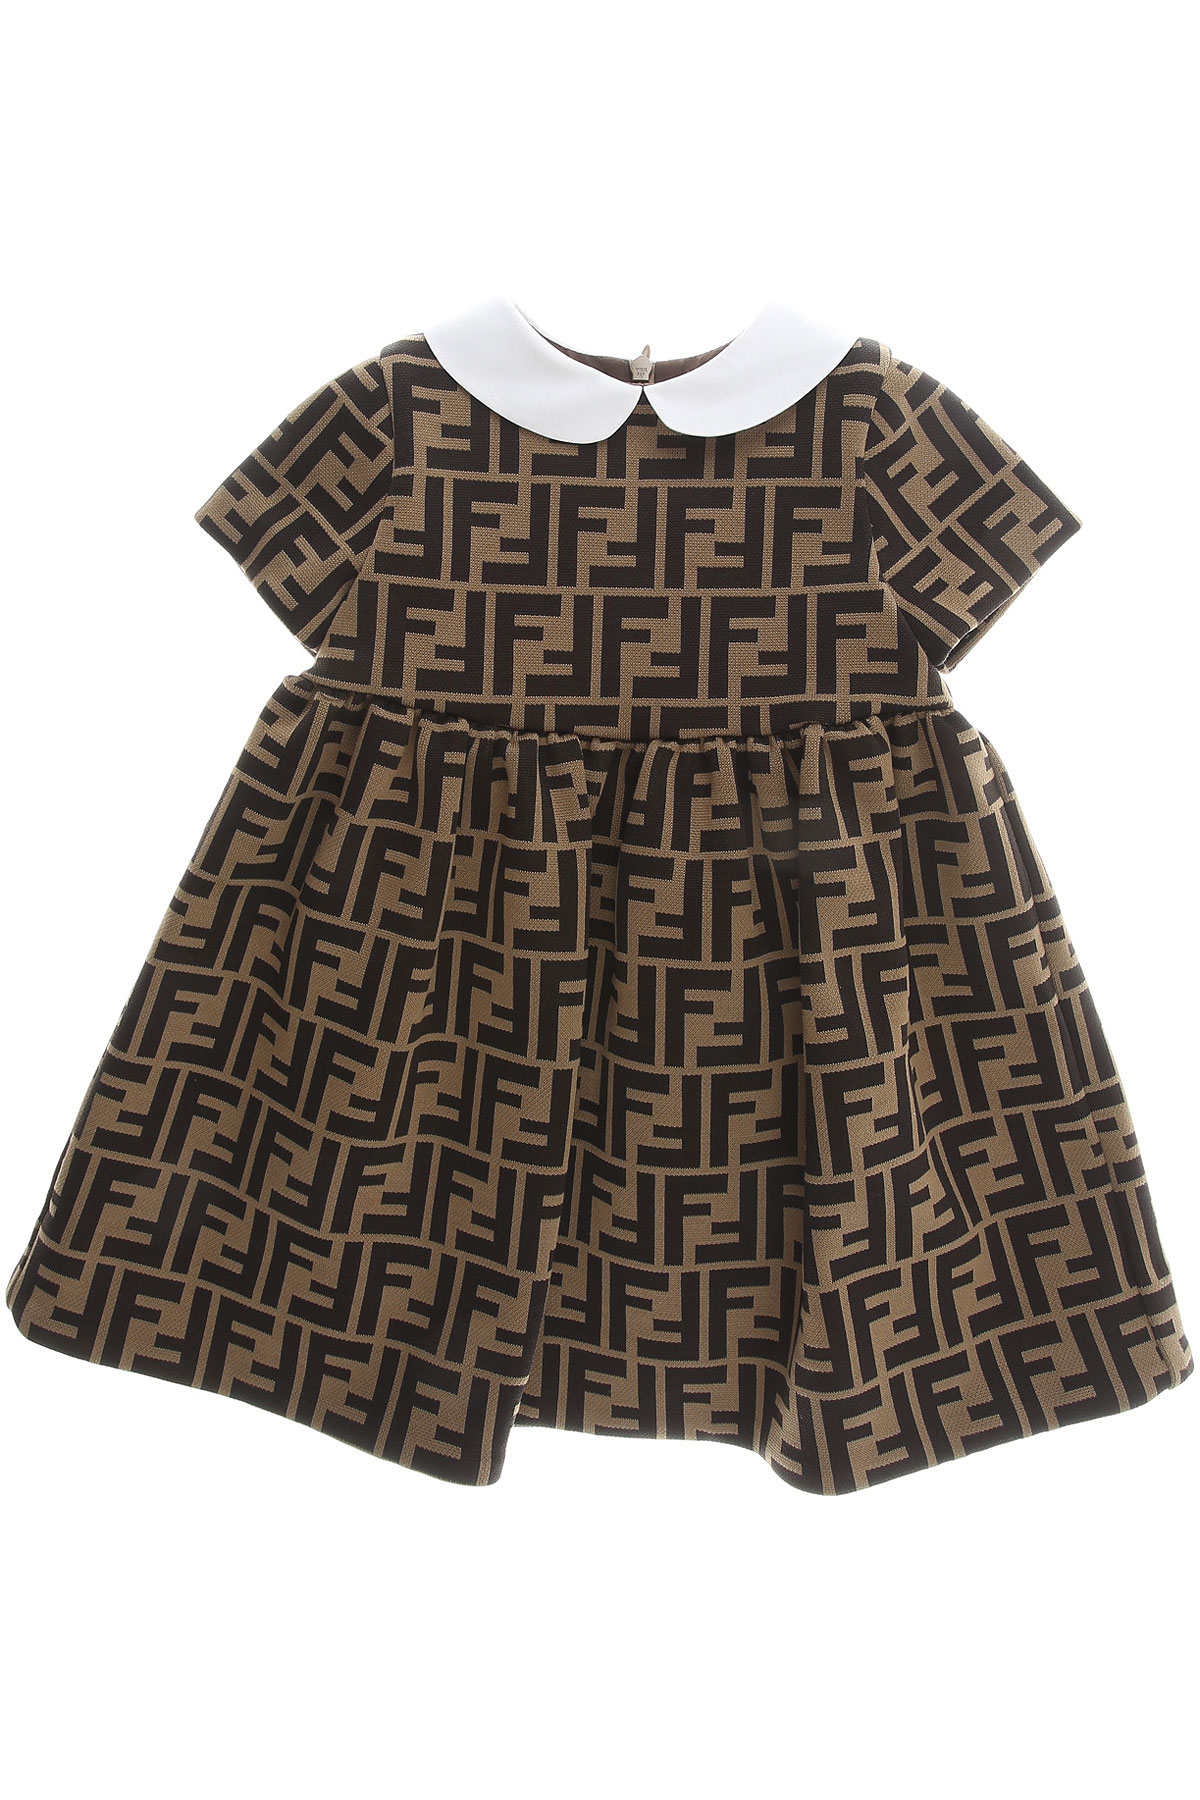 Baby Girl Clothing Fendi, Style code: bfb340-a6a6-f0e0x